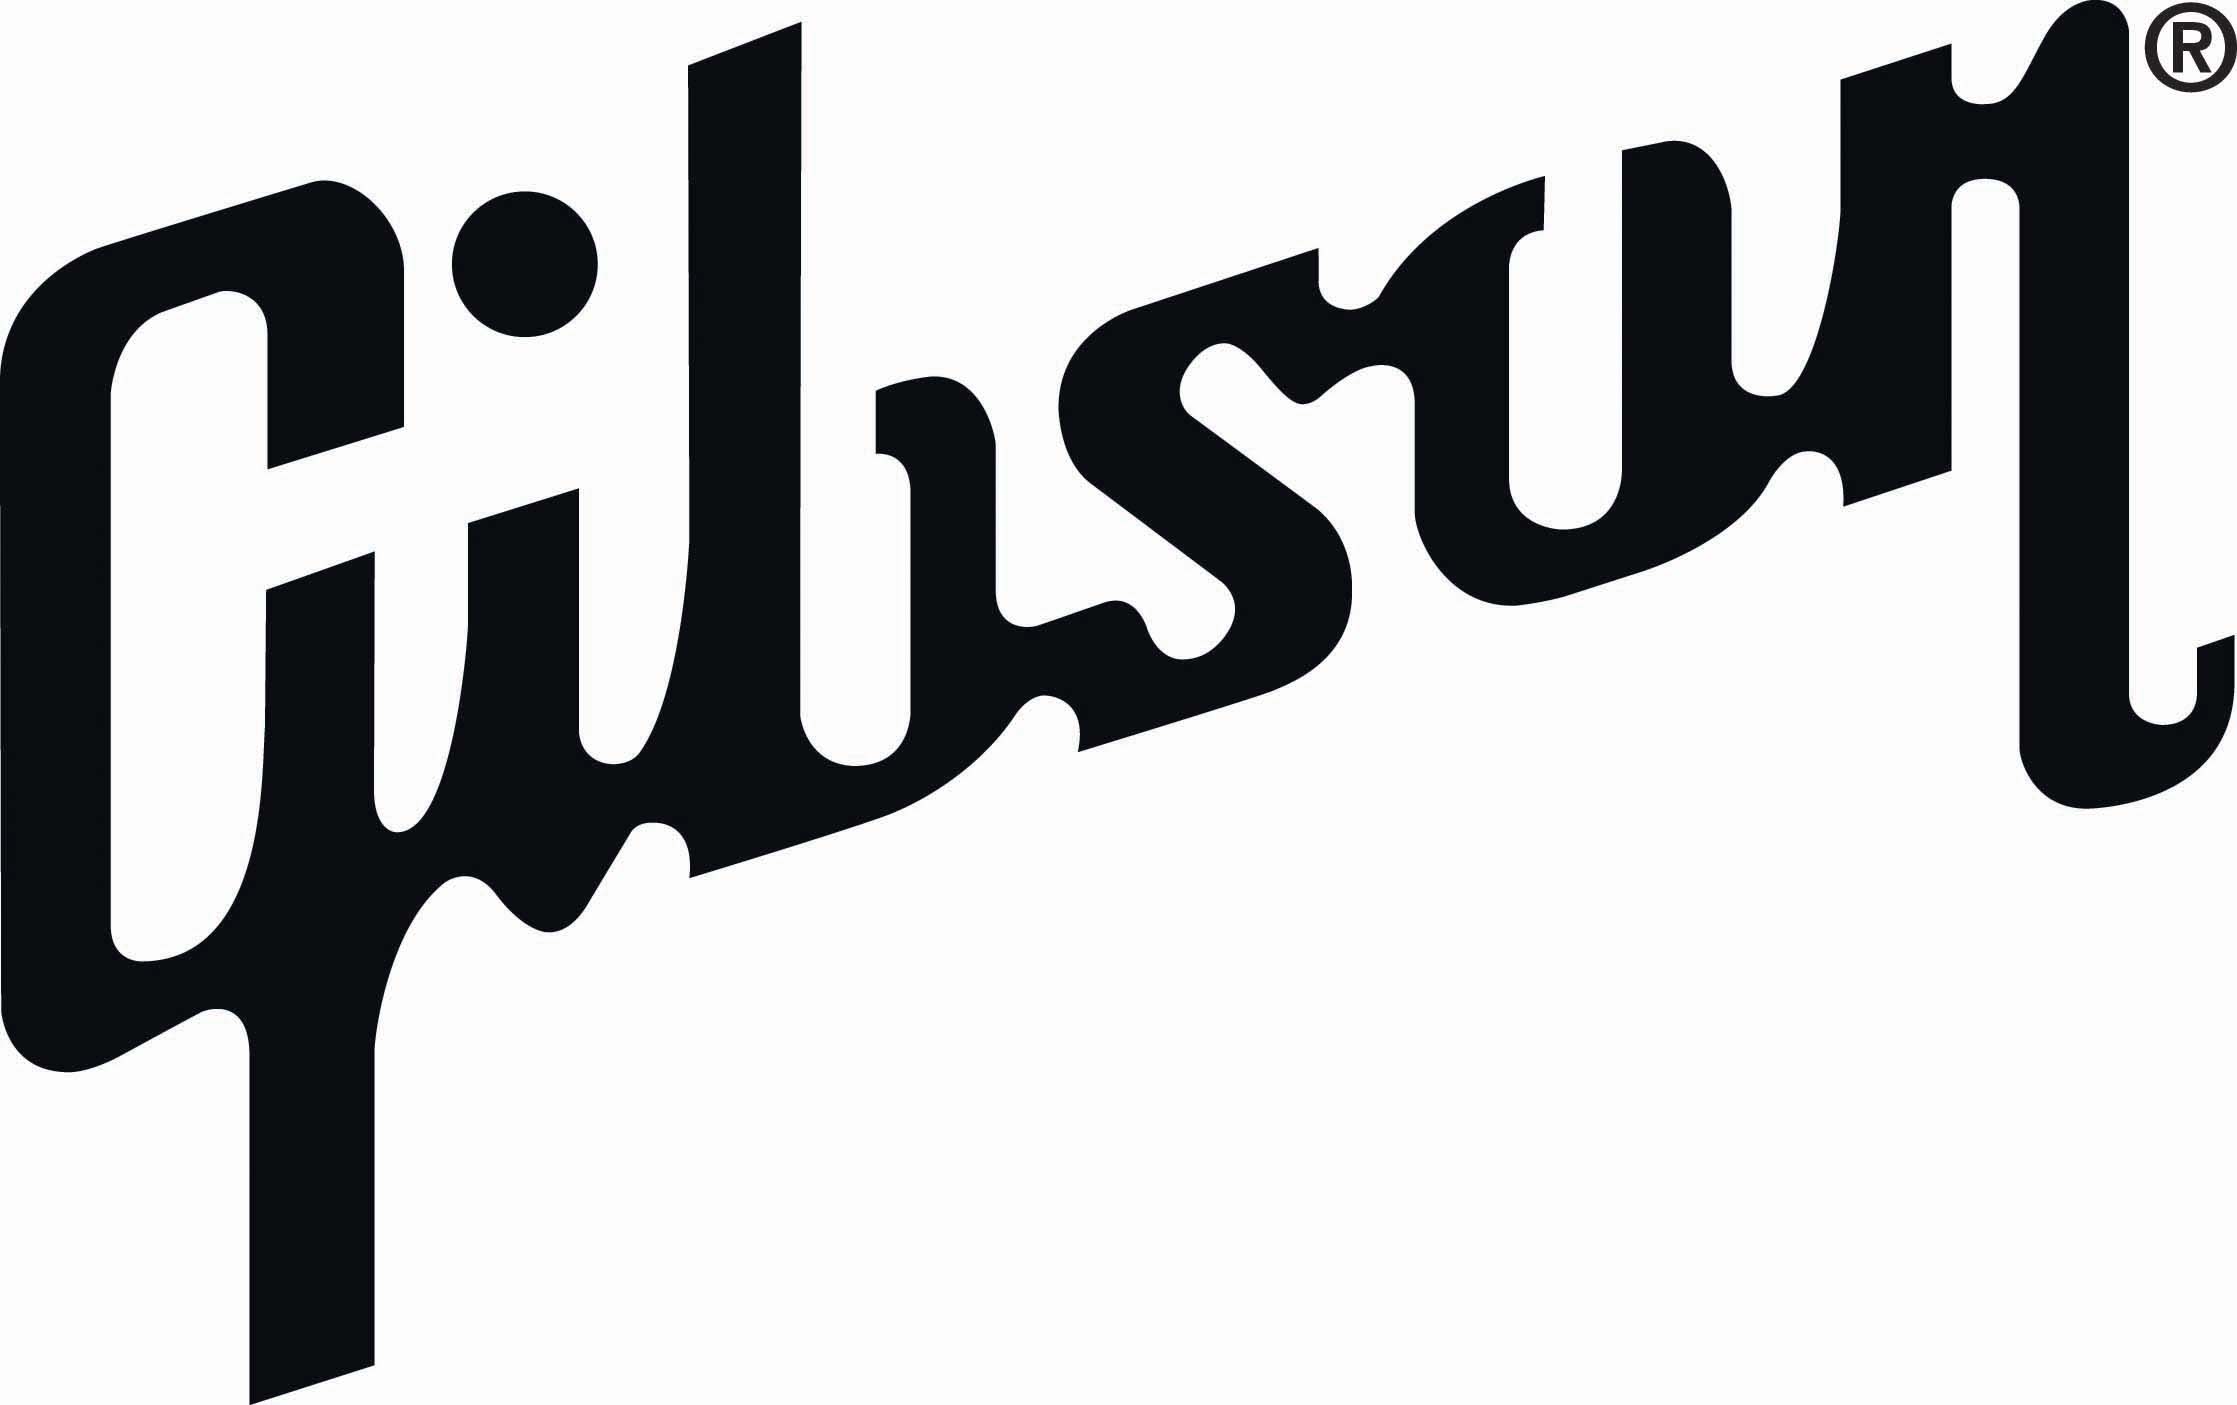 gibson Job Placement